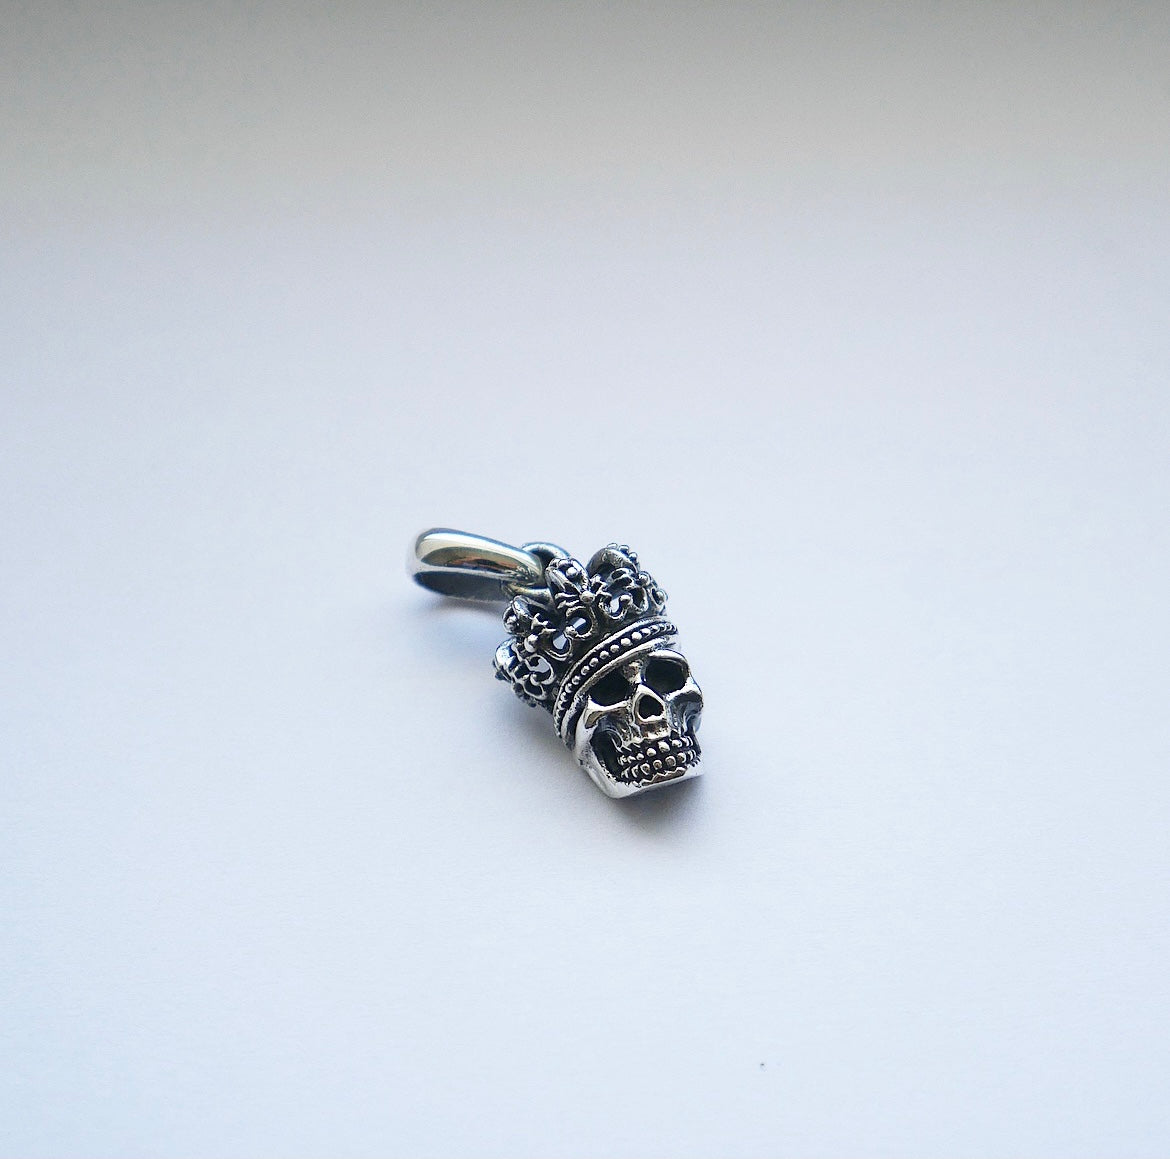 necklaces, pendants, sterling silver necklaces, halloween jewelry, accessories, fashion jewelry, fine jewelry, cool necklaces, cool jewelry, skull pendant with crown sterling silver .925, skull necklaces for men and woman, trending on instagram and titkok, vintage necklaces, skeleton, queen necklaces, white gold necklaces, pendants, charms for necklaces